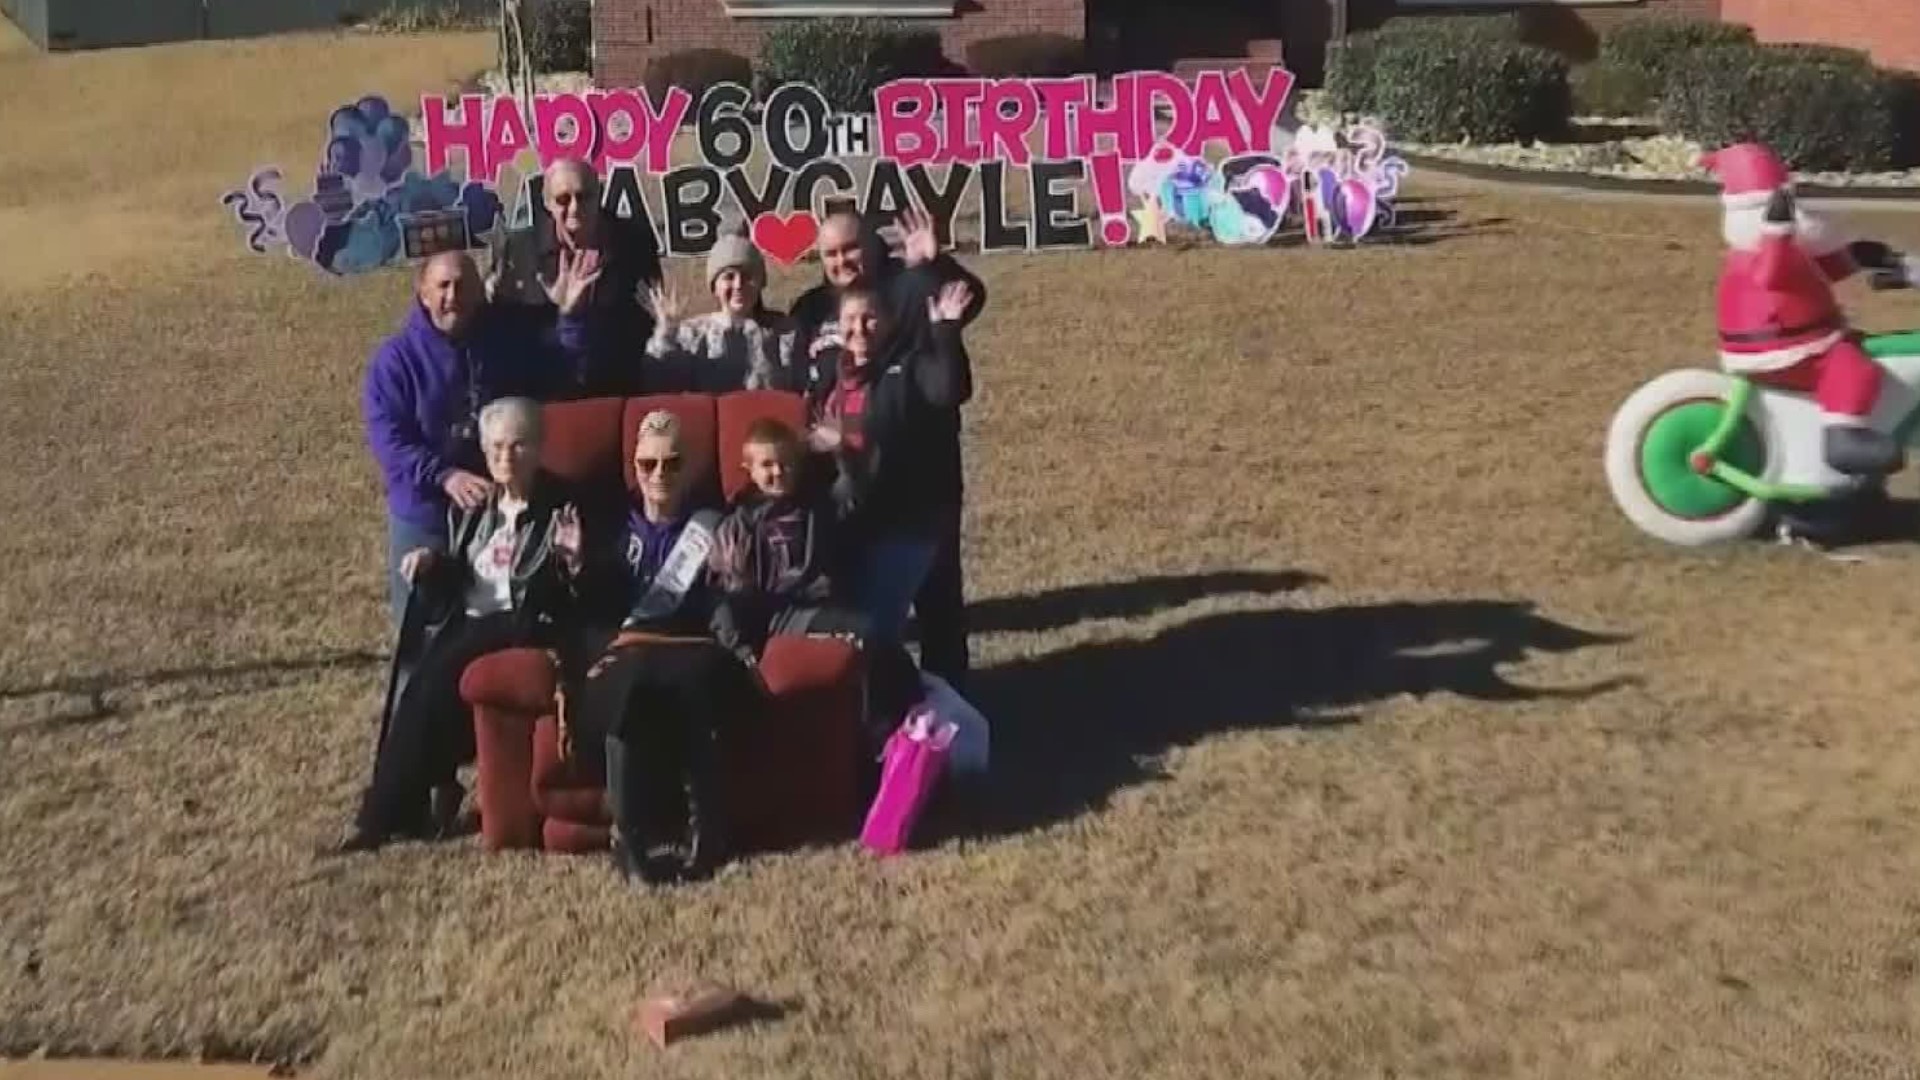 Gayle Barlow was surprised at her home with a parade of people wanting to wish her a Happy Birthday!